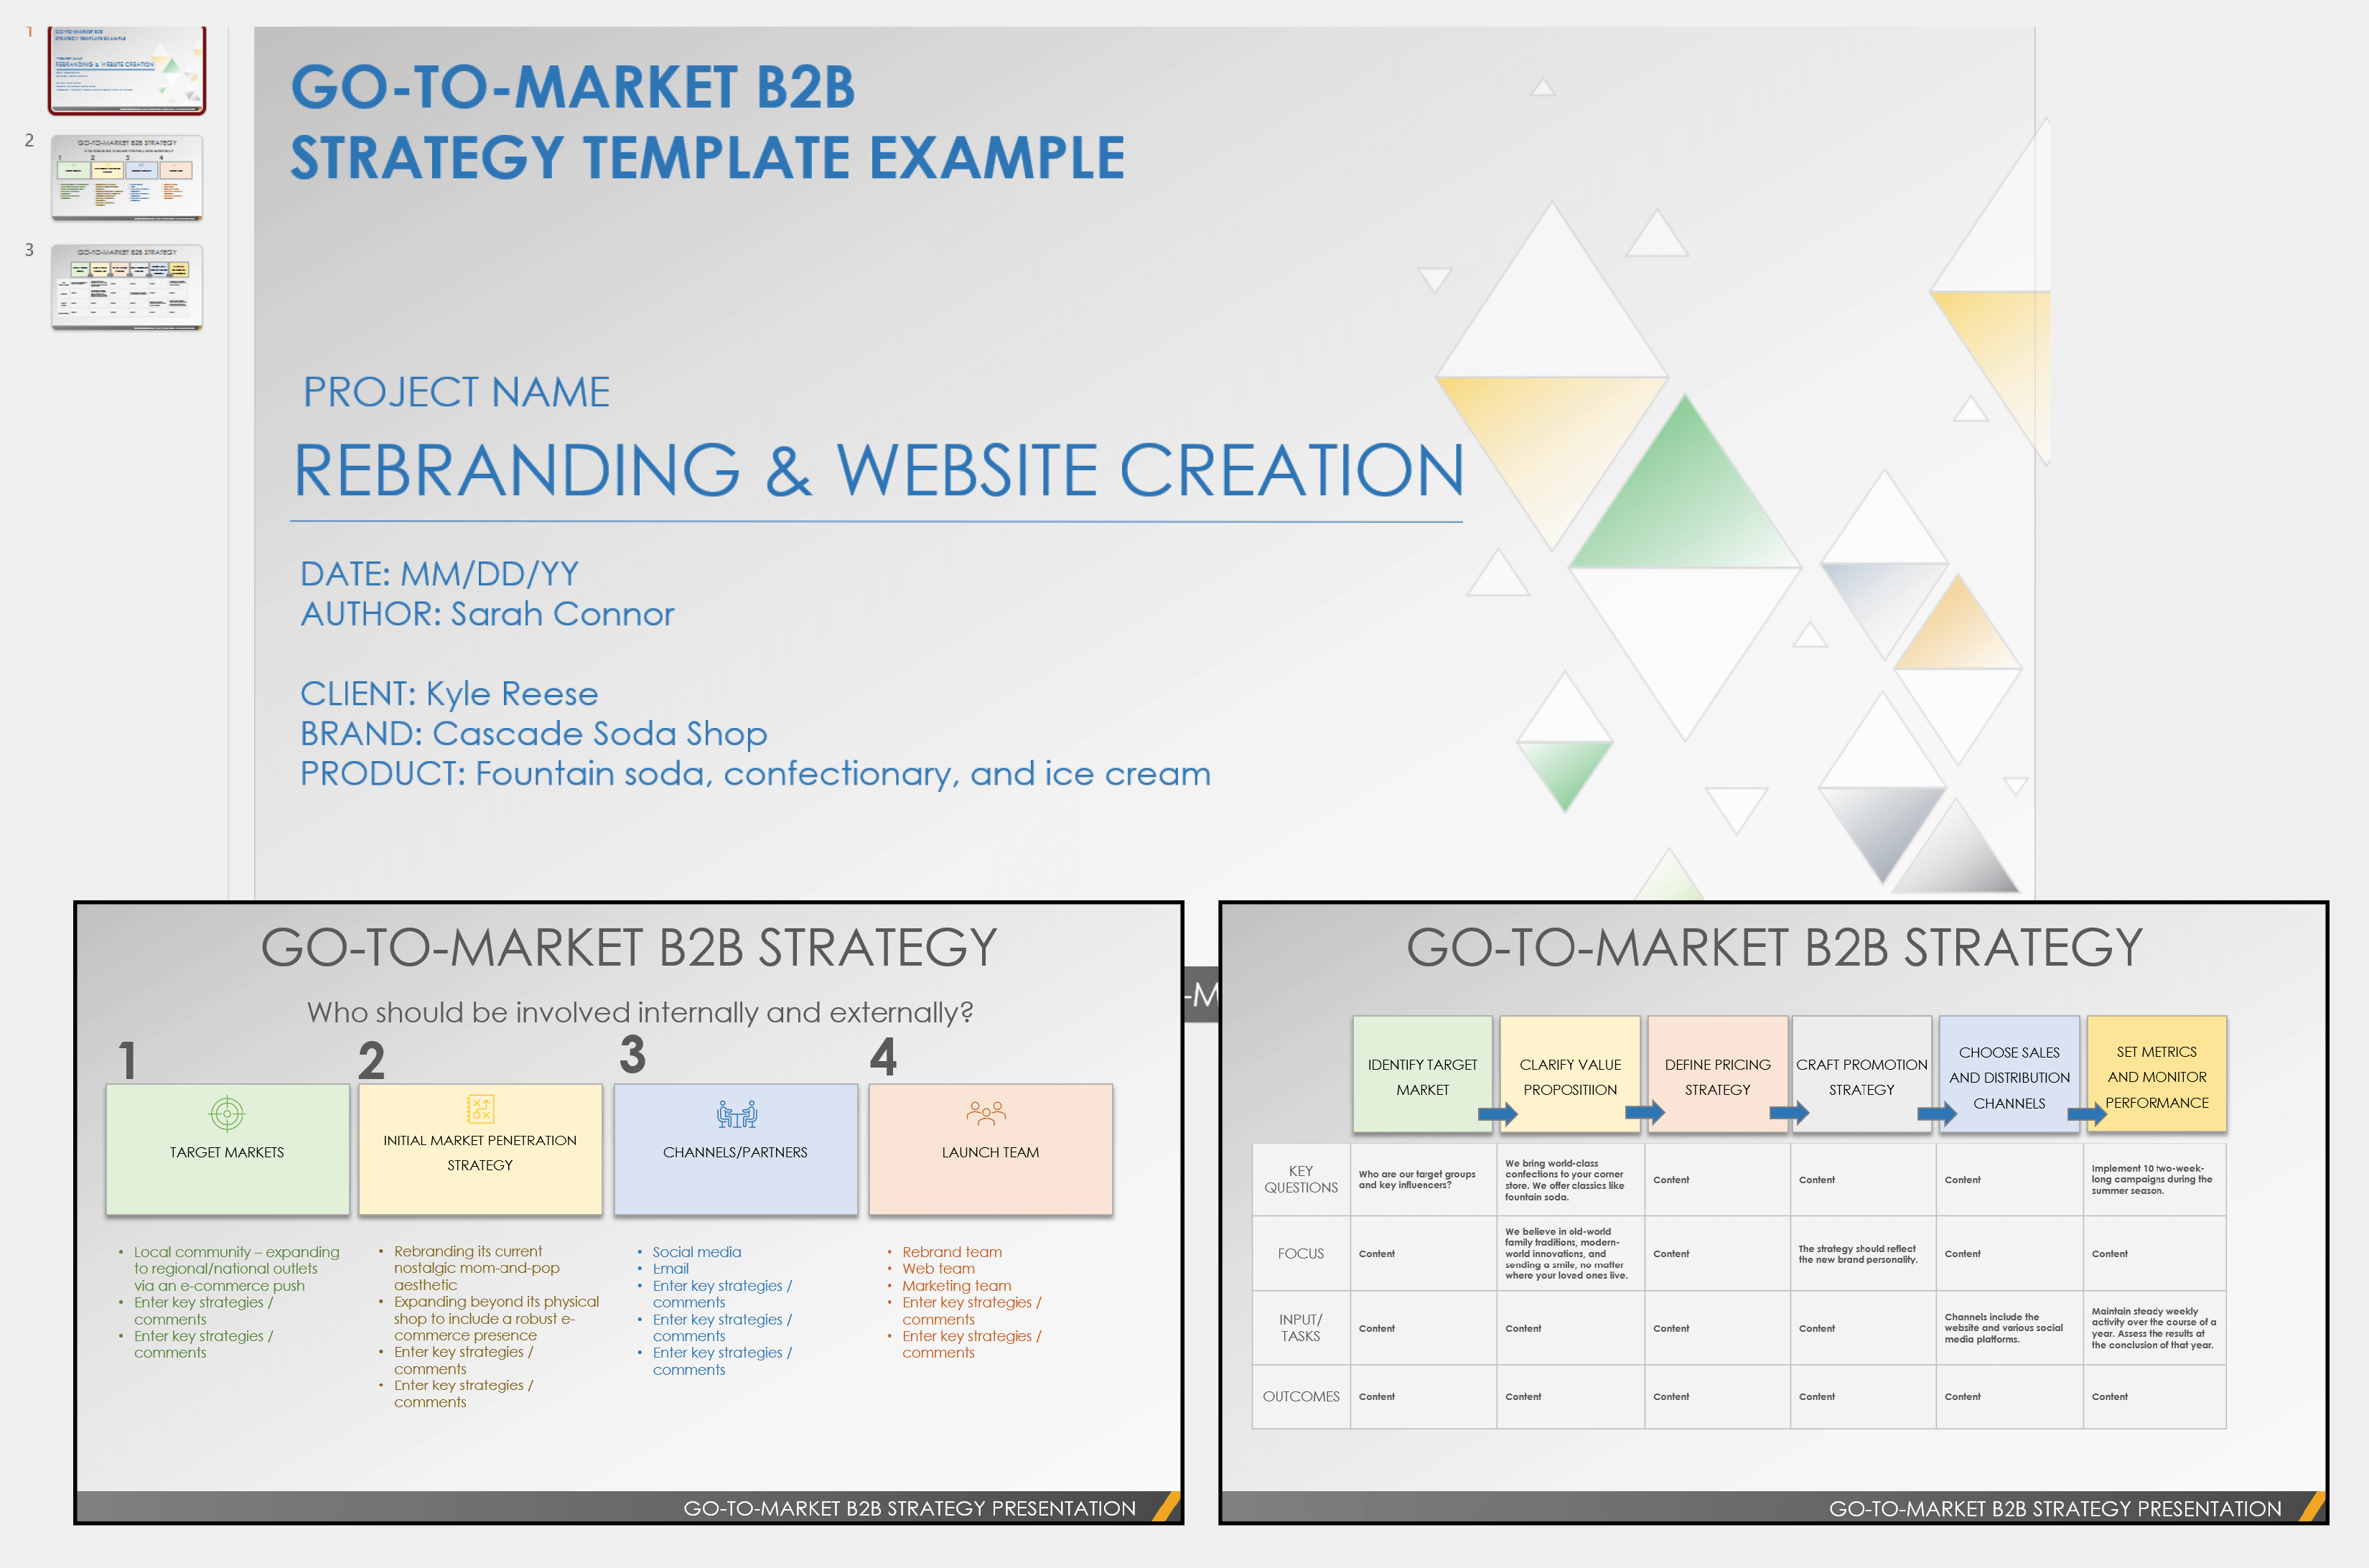 Go-to-Market B2B Strategy Template